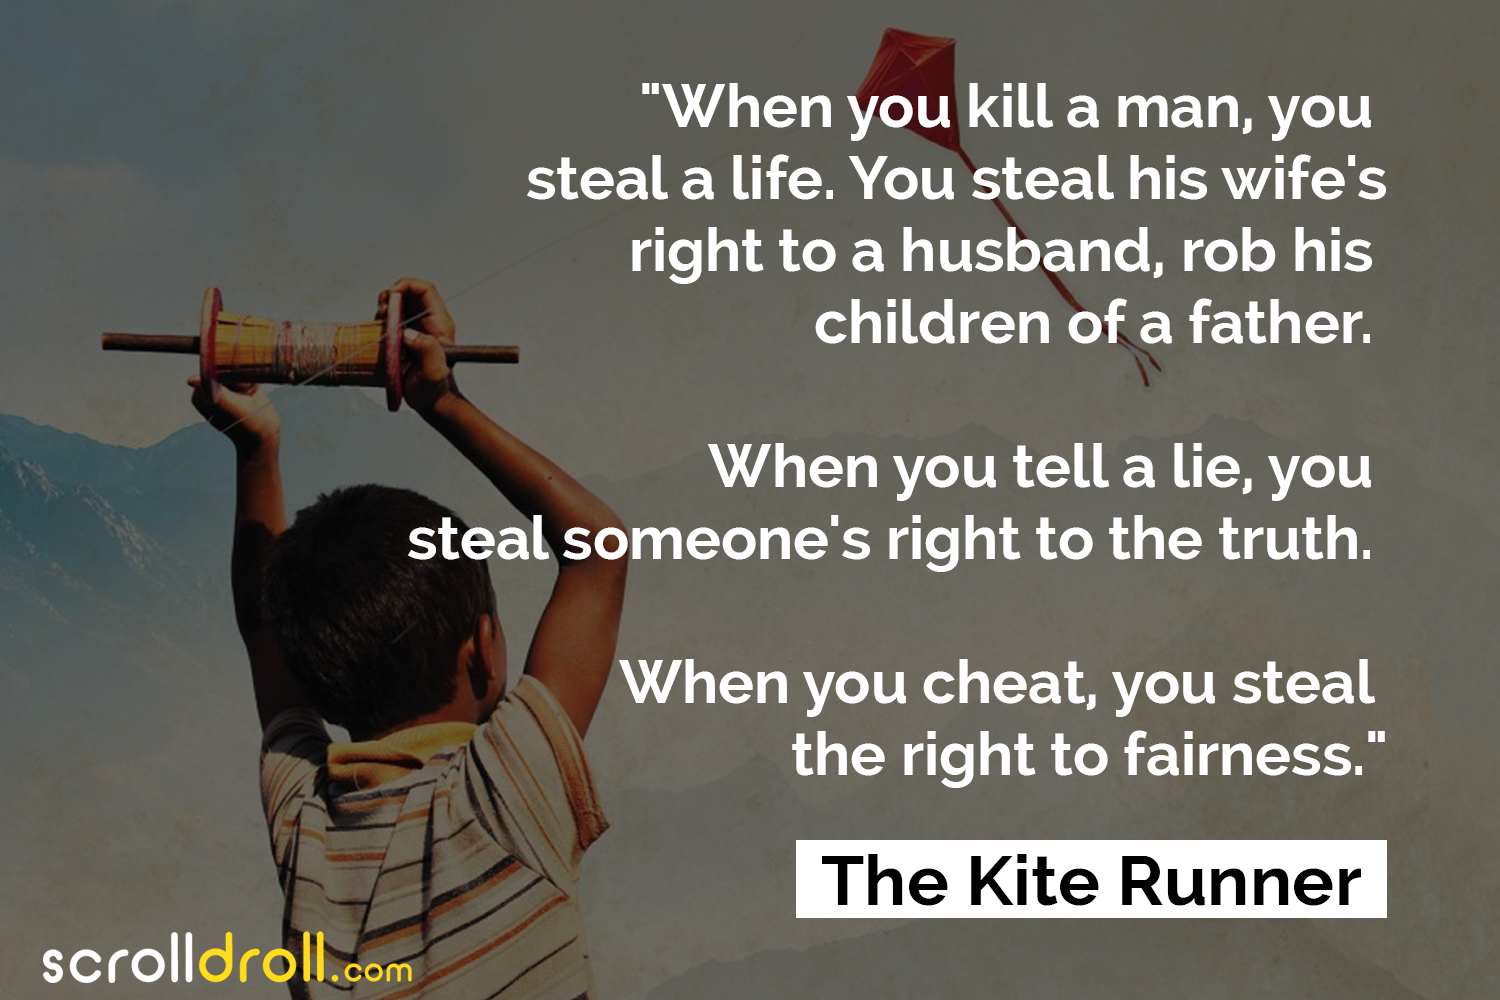 20 Best Kite Runner Quotes About Life, Love, Friendships & More